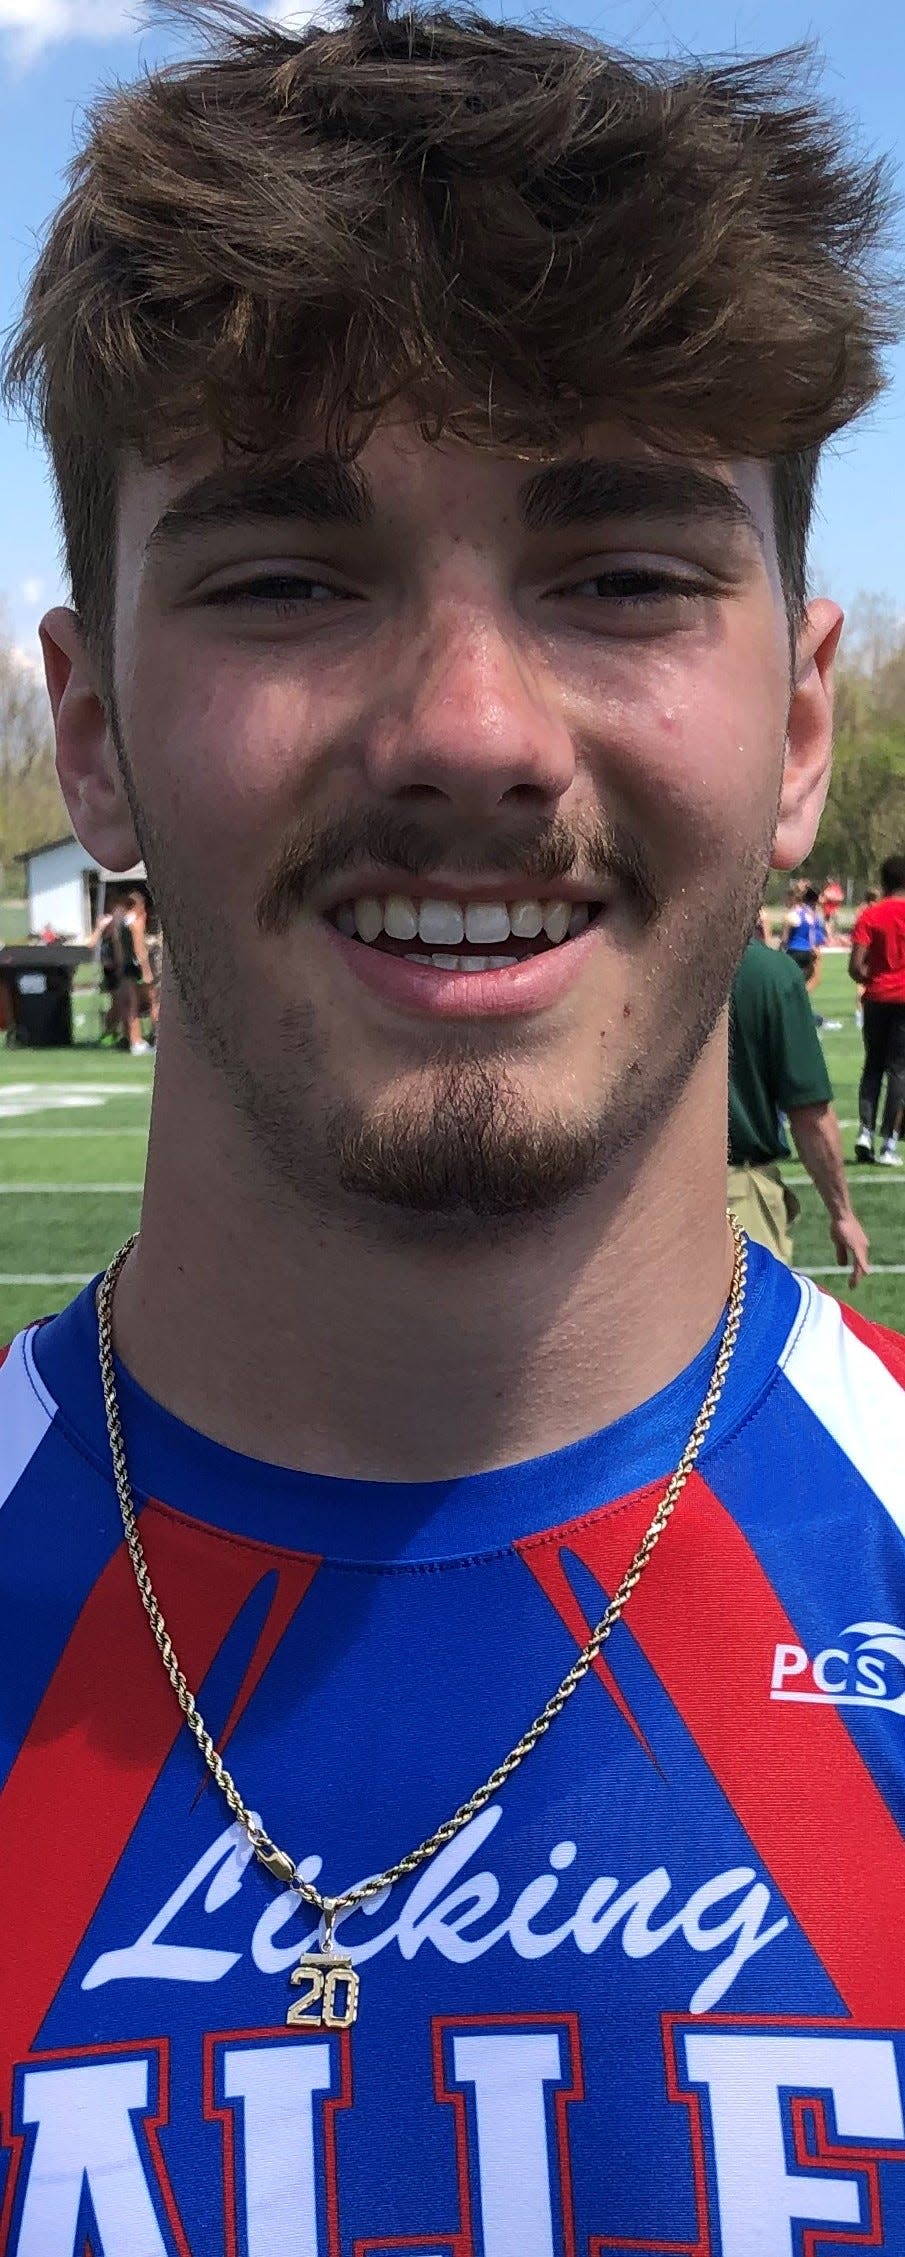 Licking Valley junior Jacob Wheeler won the long jump with a leap of 20-.5 on Saturday in Heath's Hank Smith Invitational.